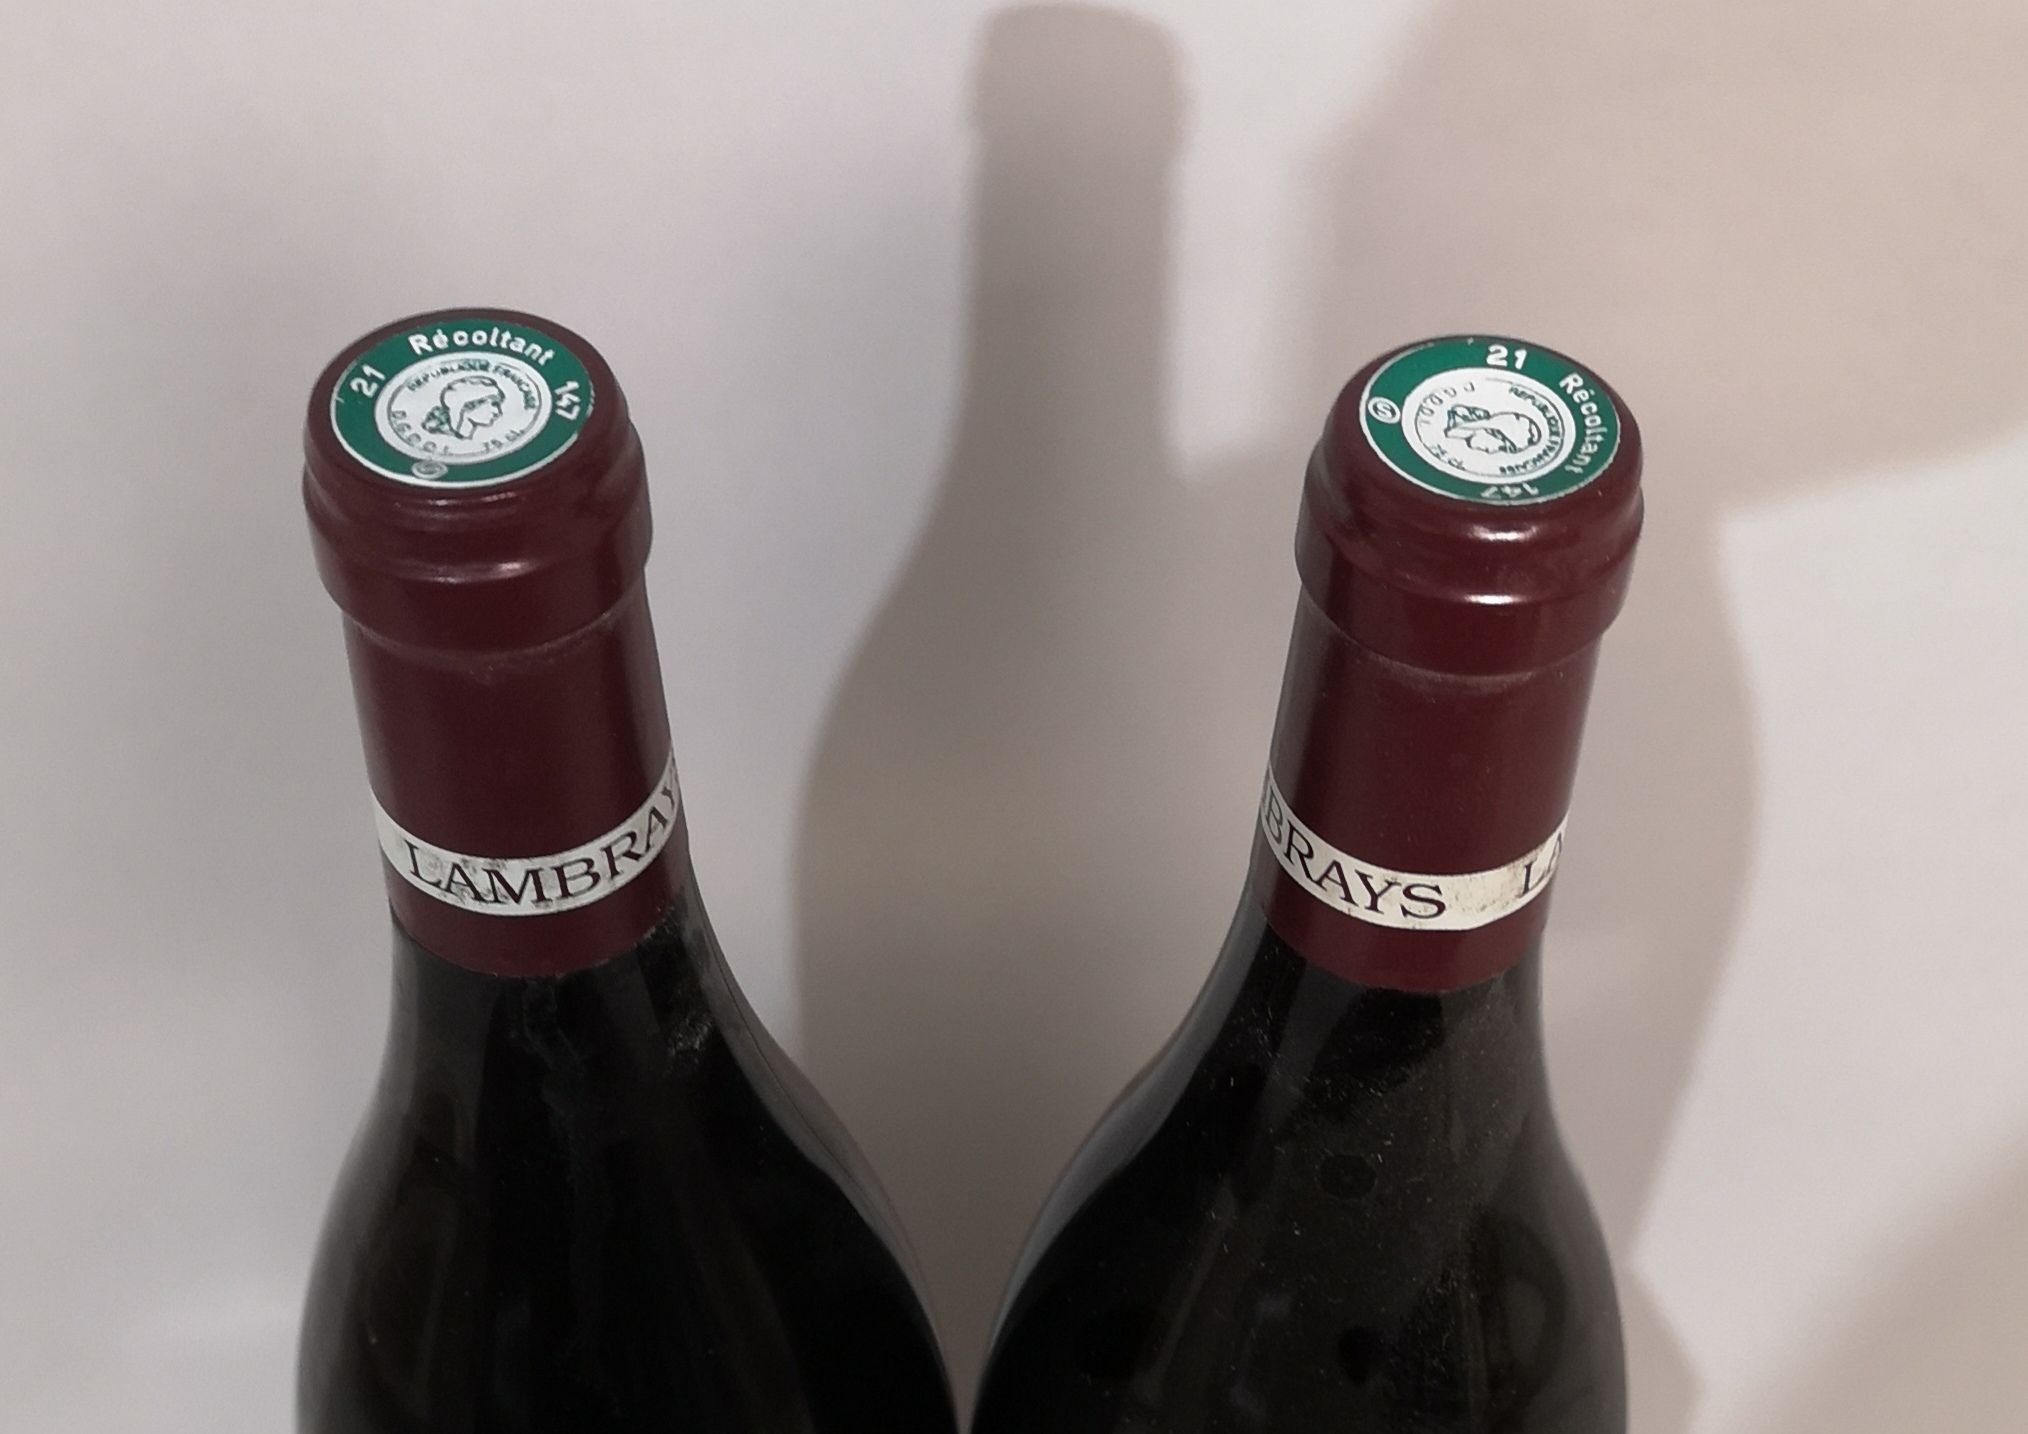 2 bottles CLOS des LAMBRAYS Grand Cru - Domaine des LAMBRAYS 2006.
 Labels slightly stained. - Image 2 of 2